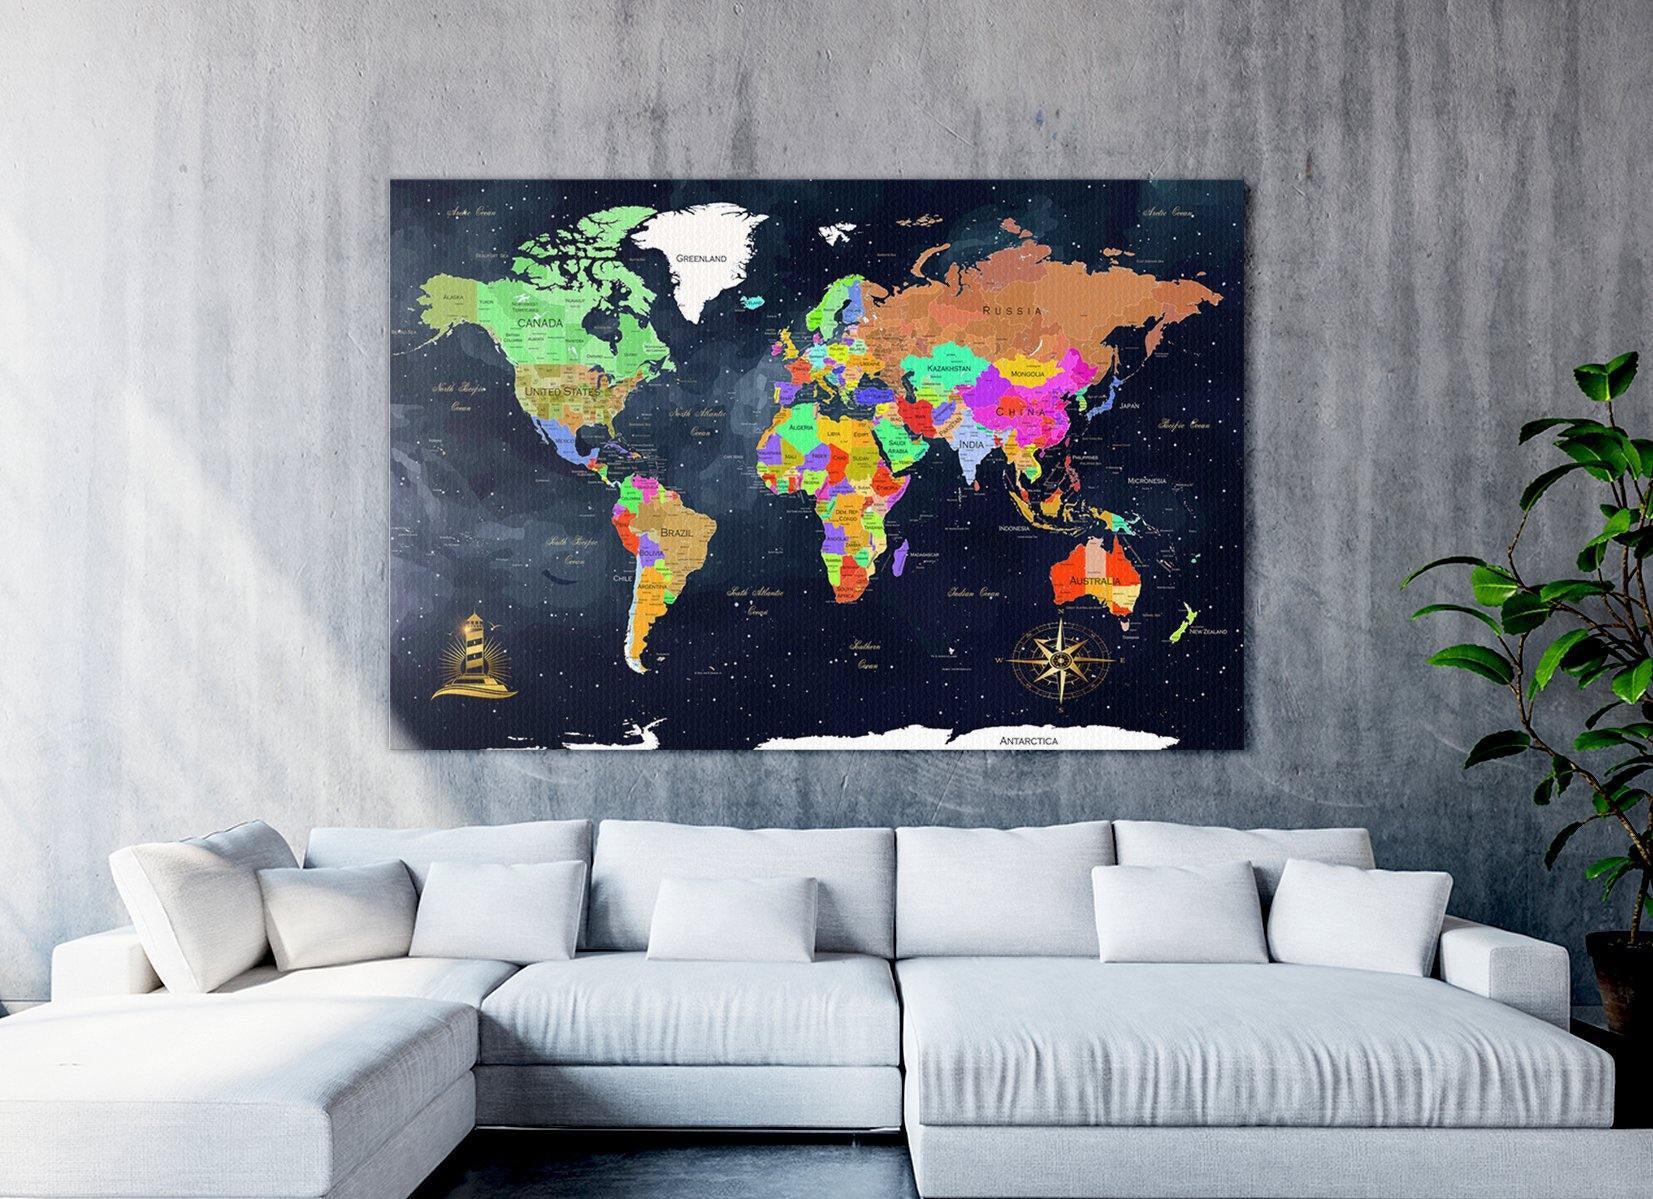 How to Choose Wall Art World Map in 2021